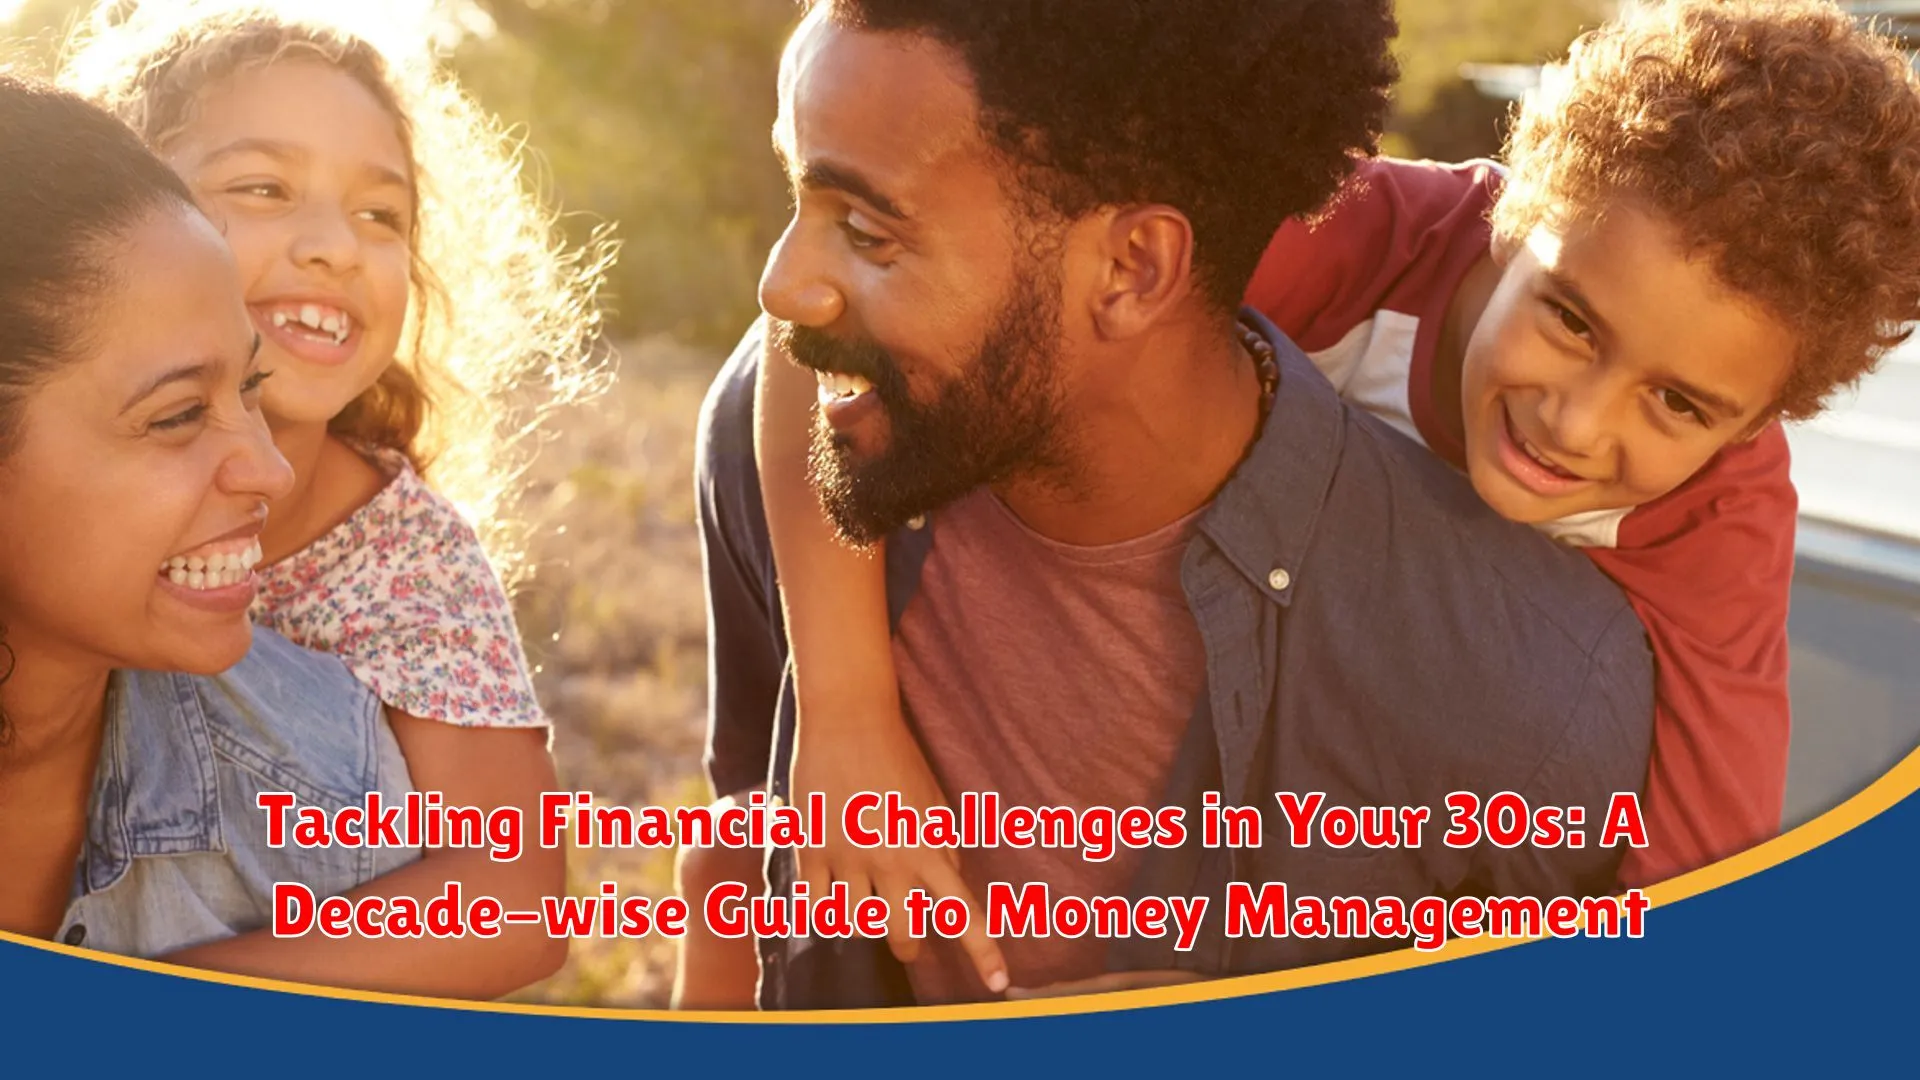 Tackling Financial Challenges in Your 30s: A Decade-wise Guide to Money Management